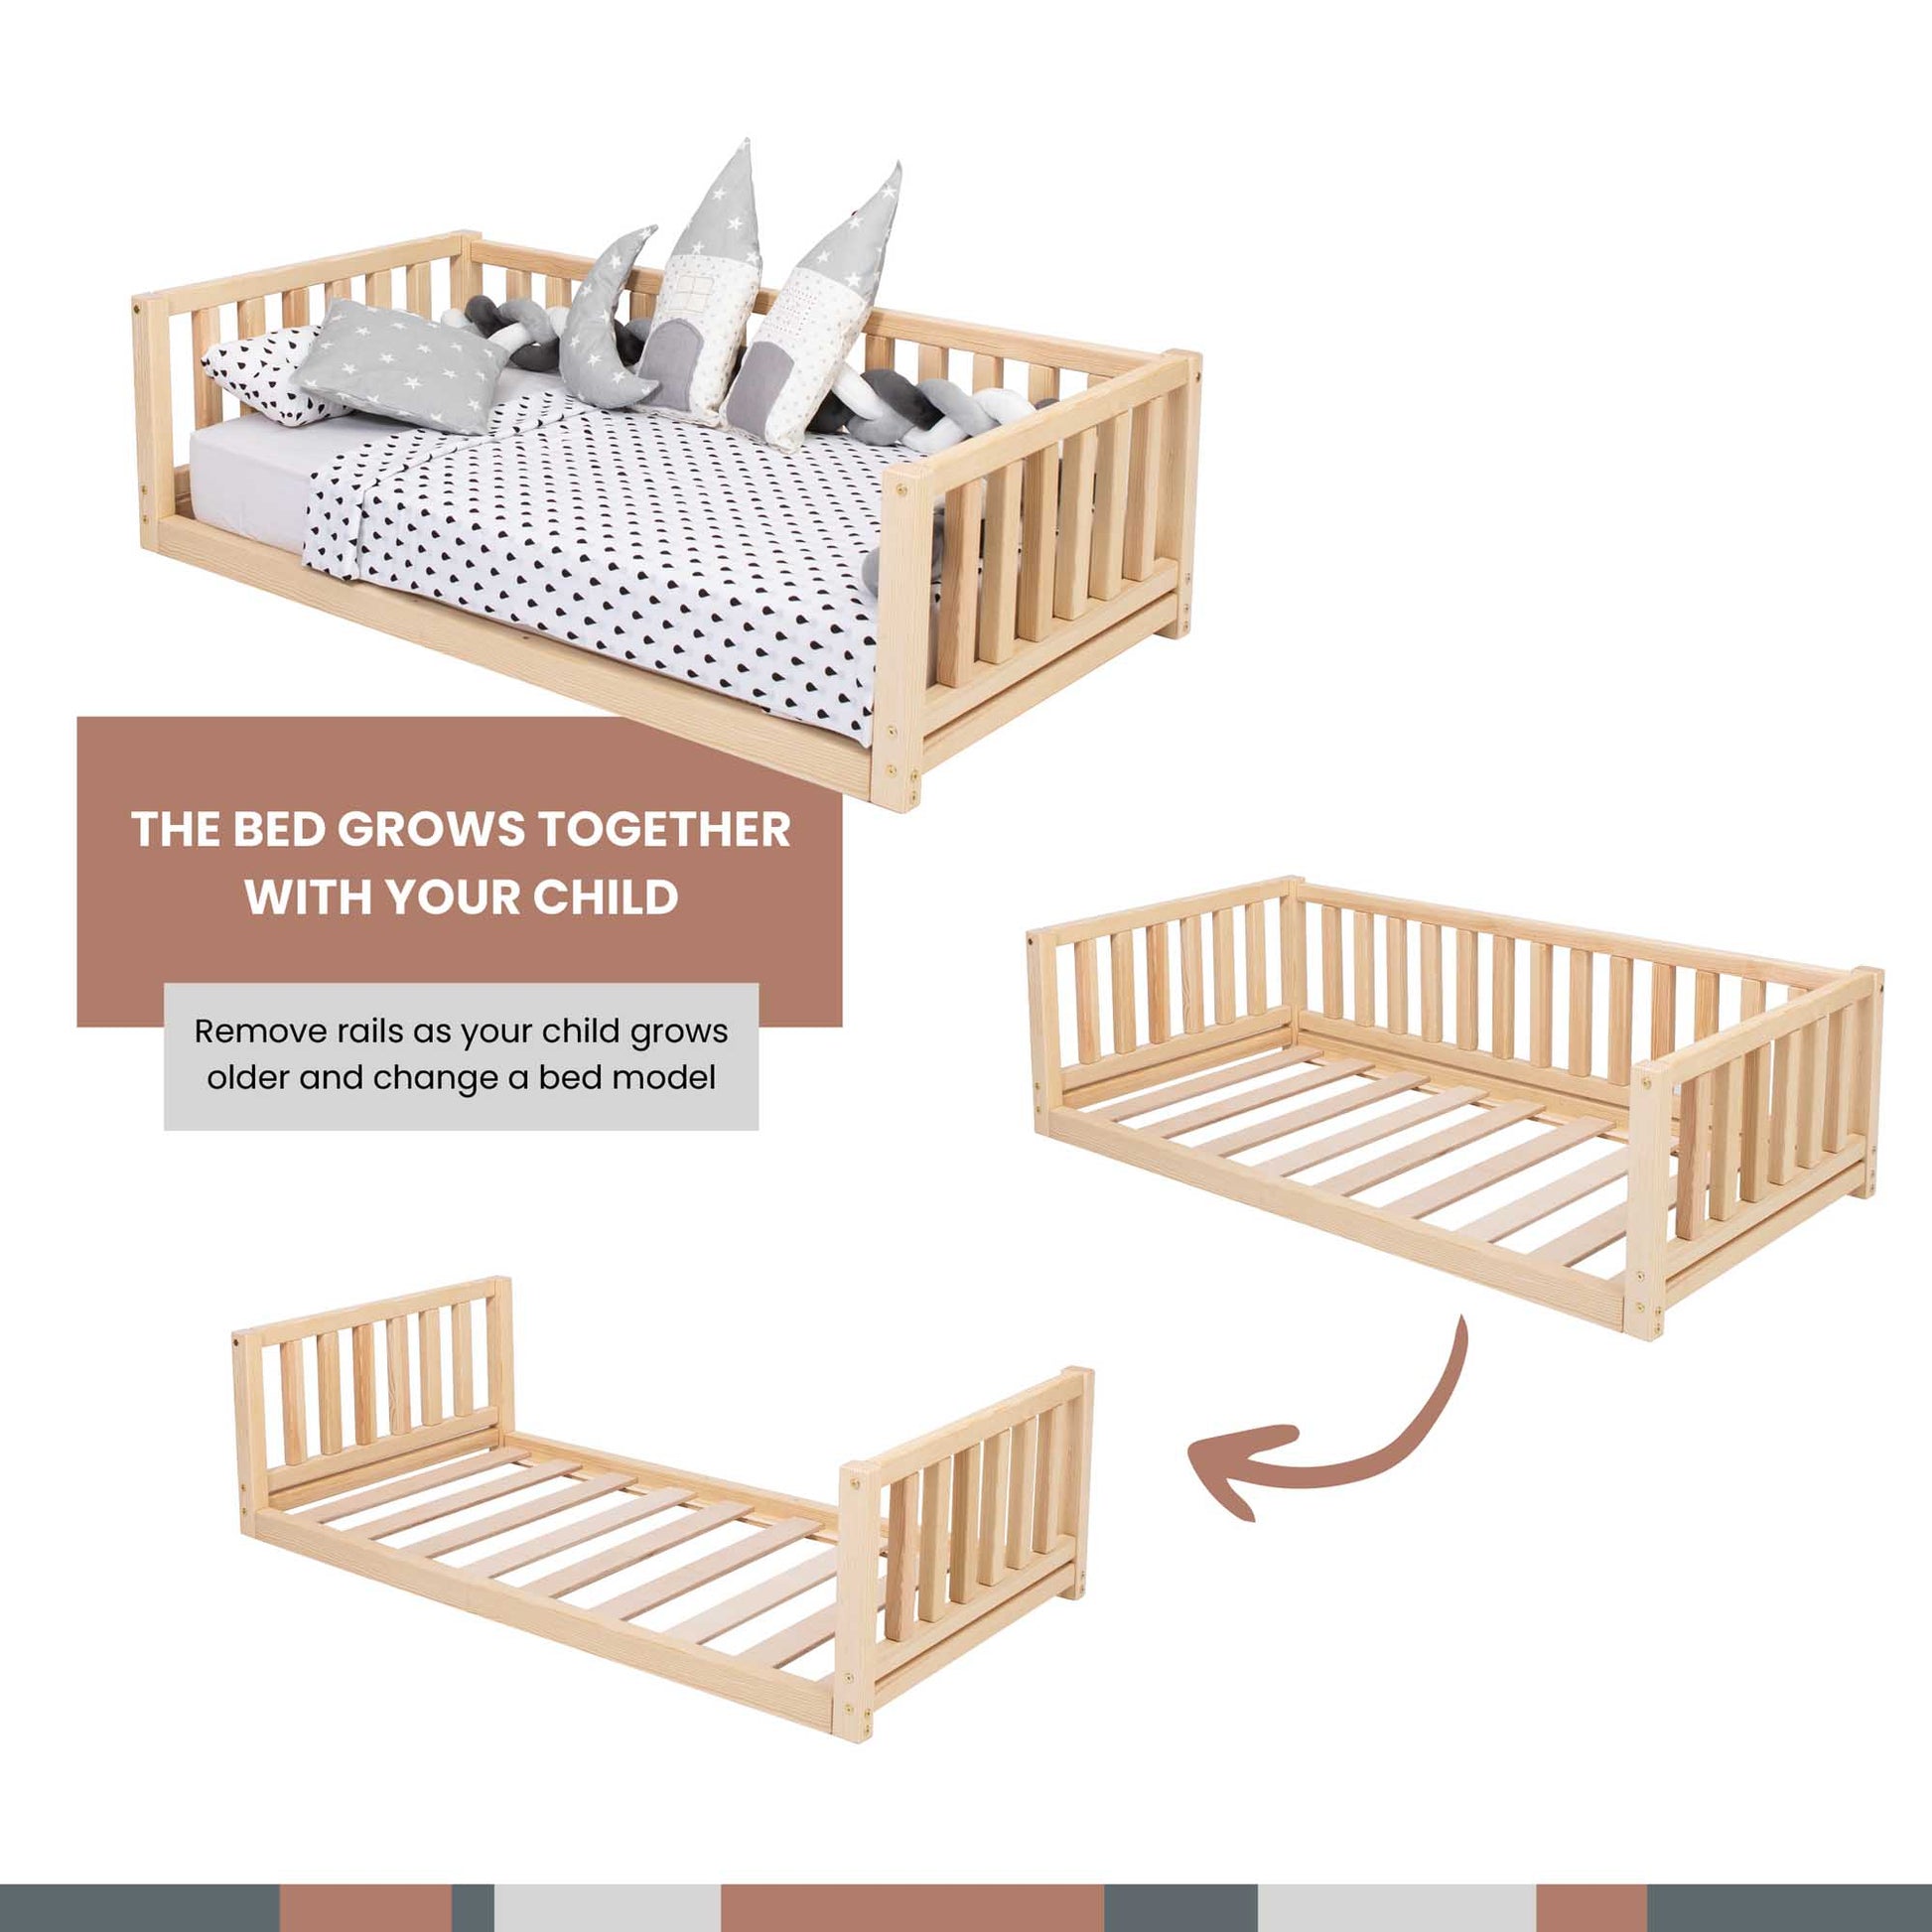 The Sweet Home From Wood Montessori bed with 3-sided rails grows together with your child.